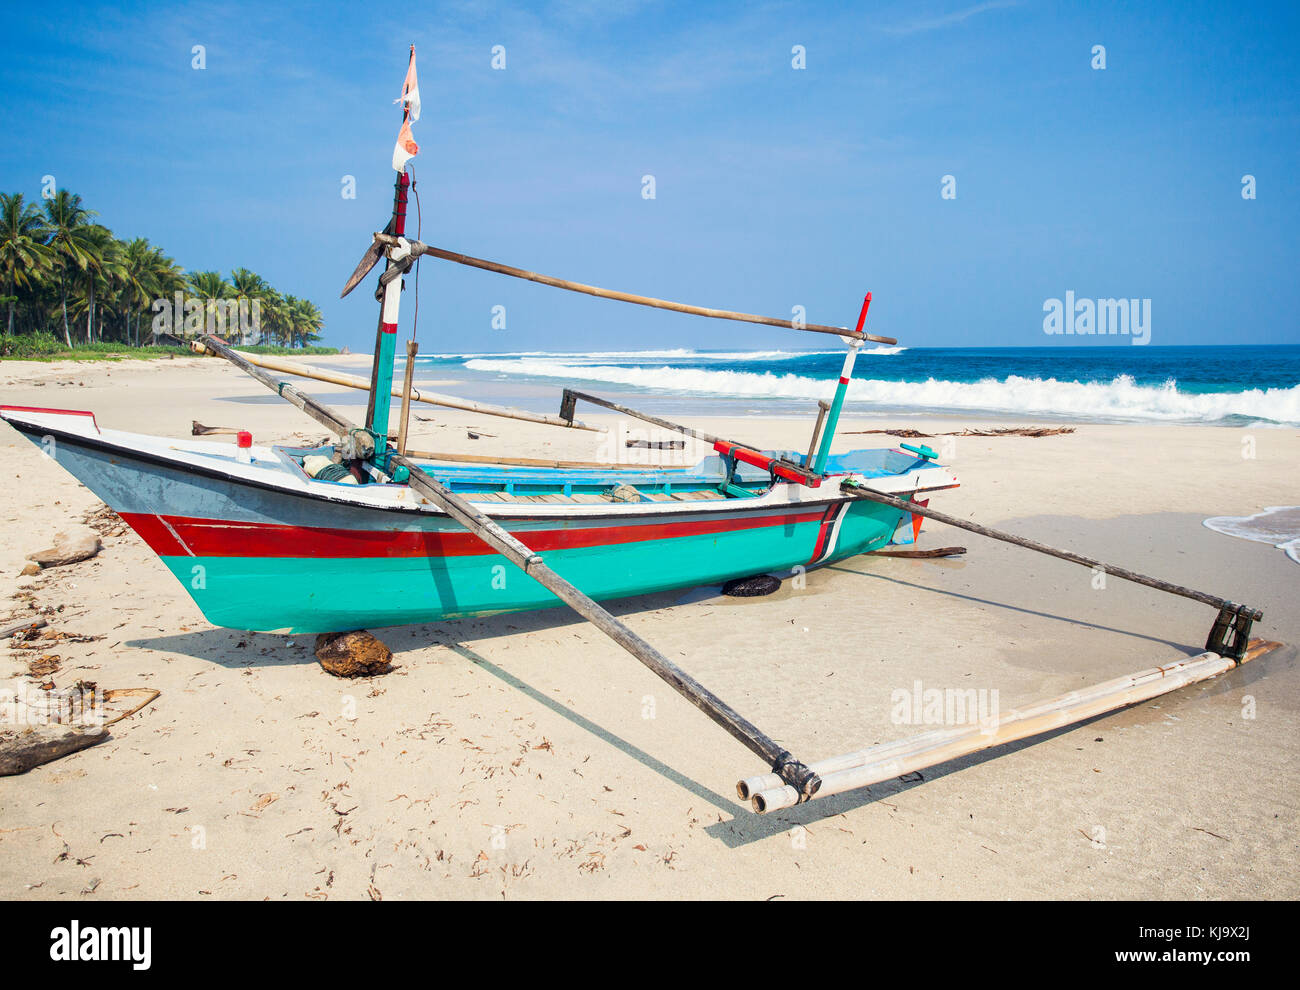 Beautiful landscape of a boat on a beach from Indonésia Stock Photo